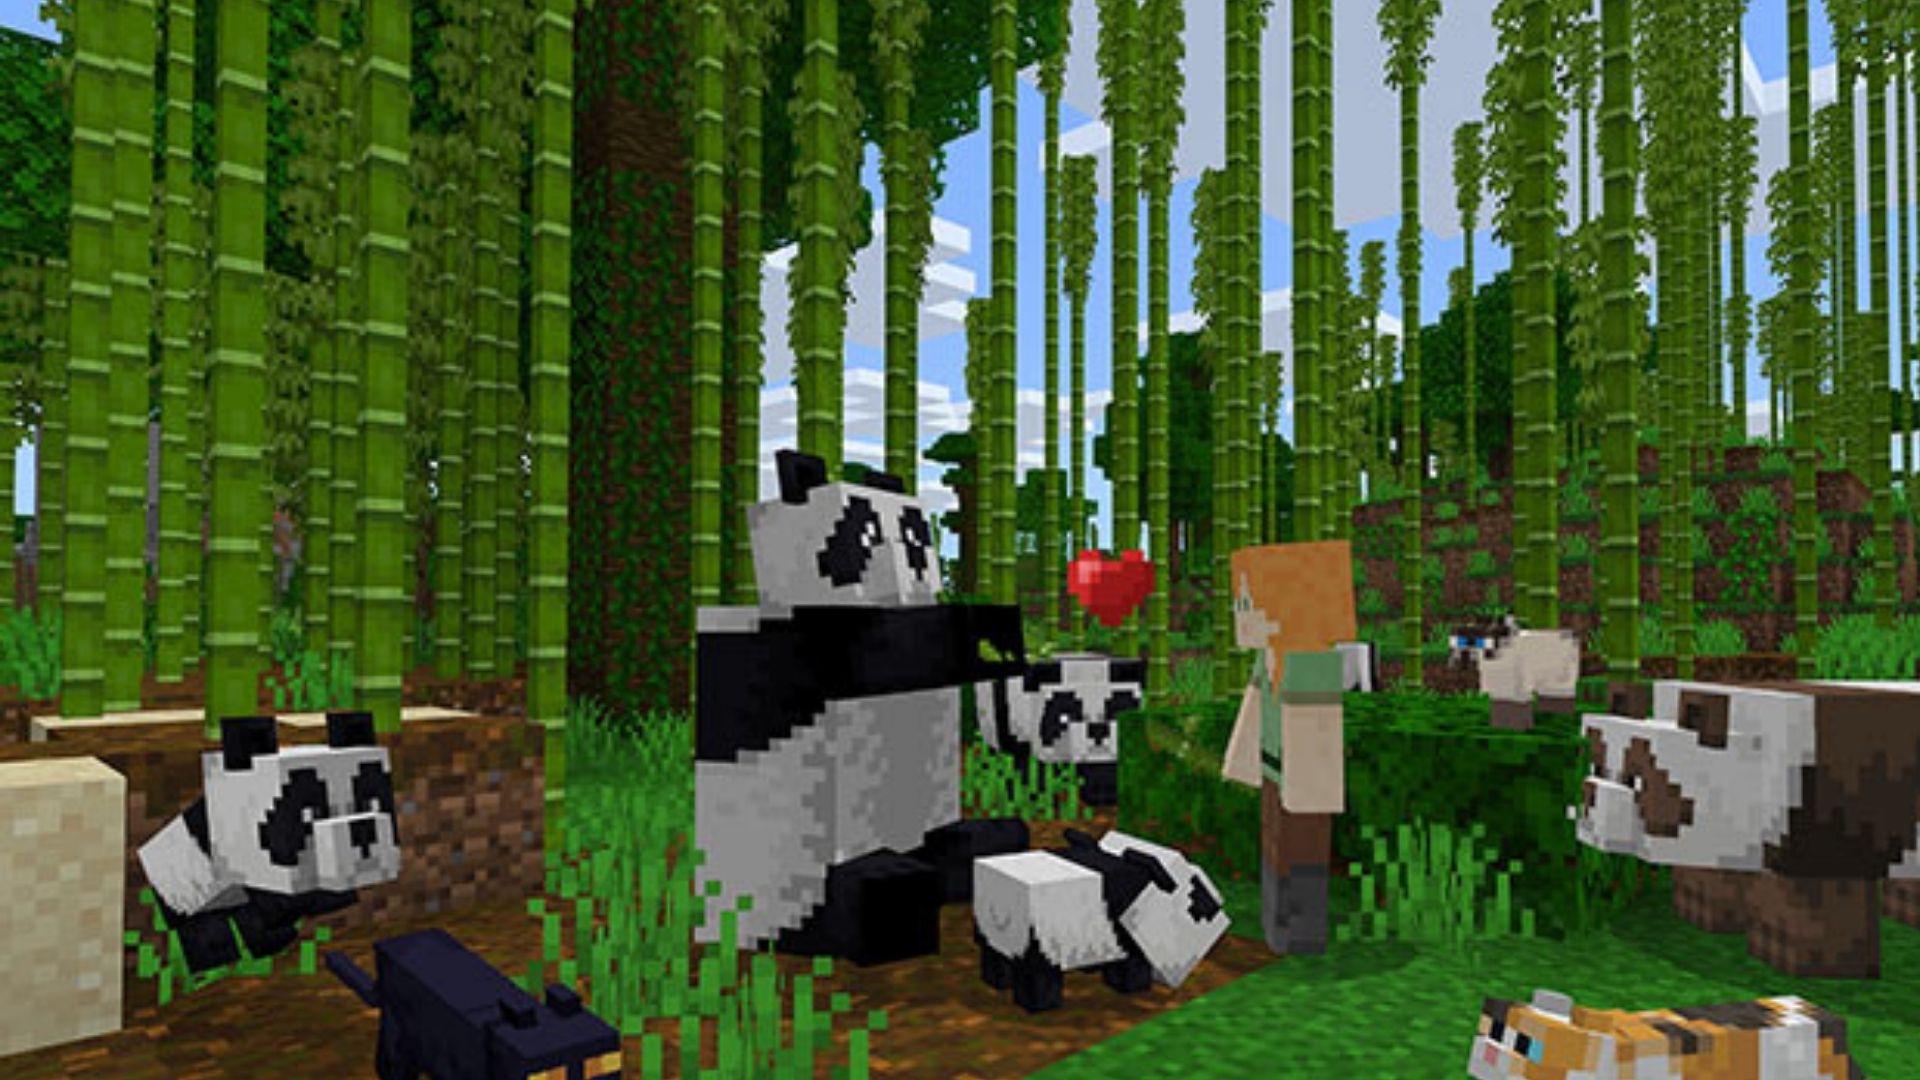 Best city-building games: Minecraft. Image shows a group of pandas near the character Alex in a field of bamboo.